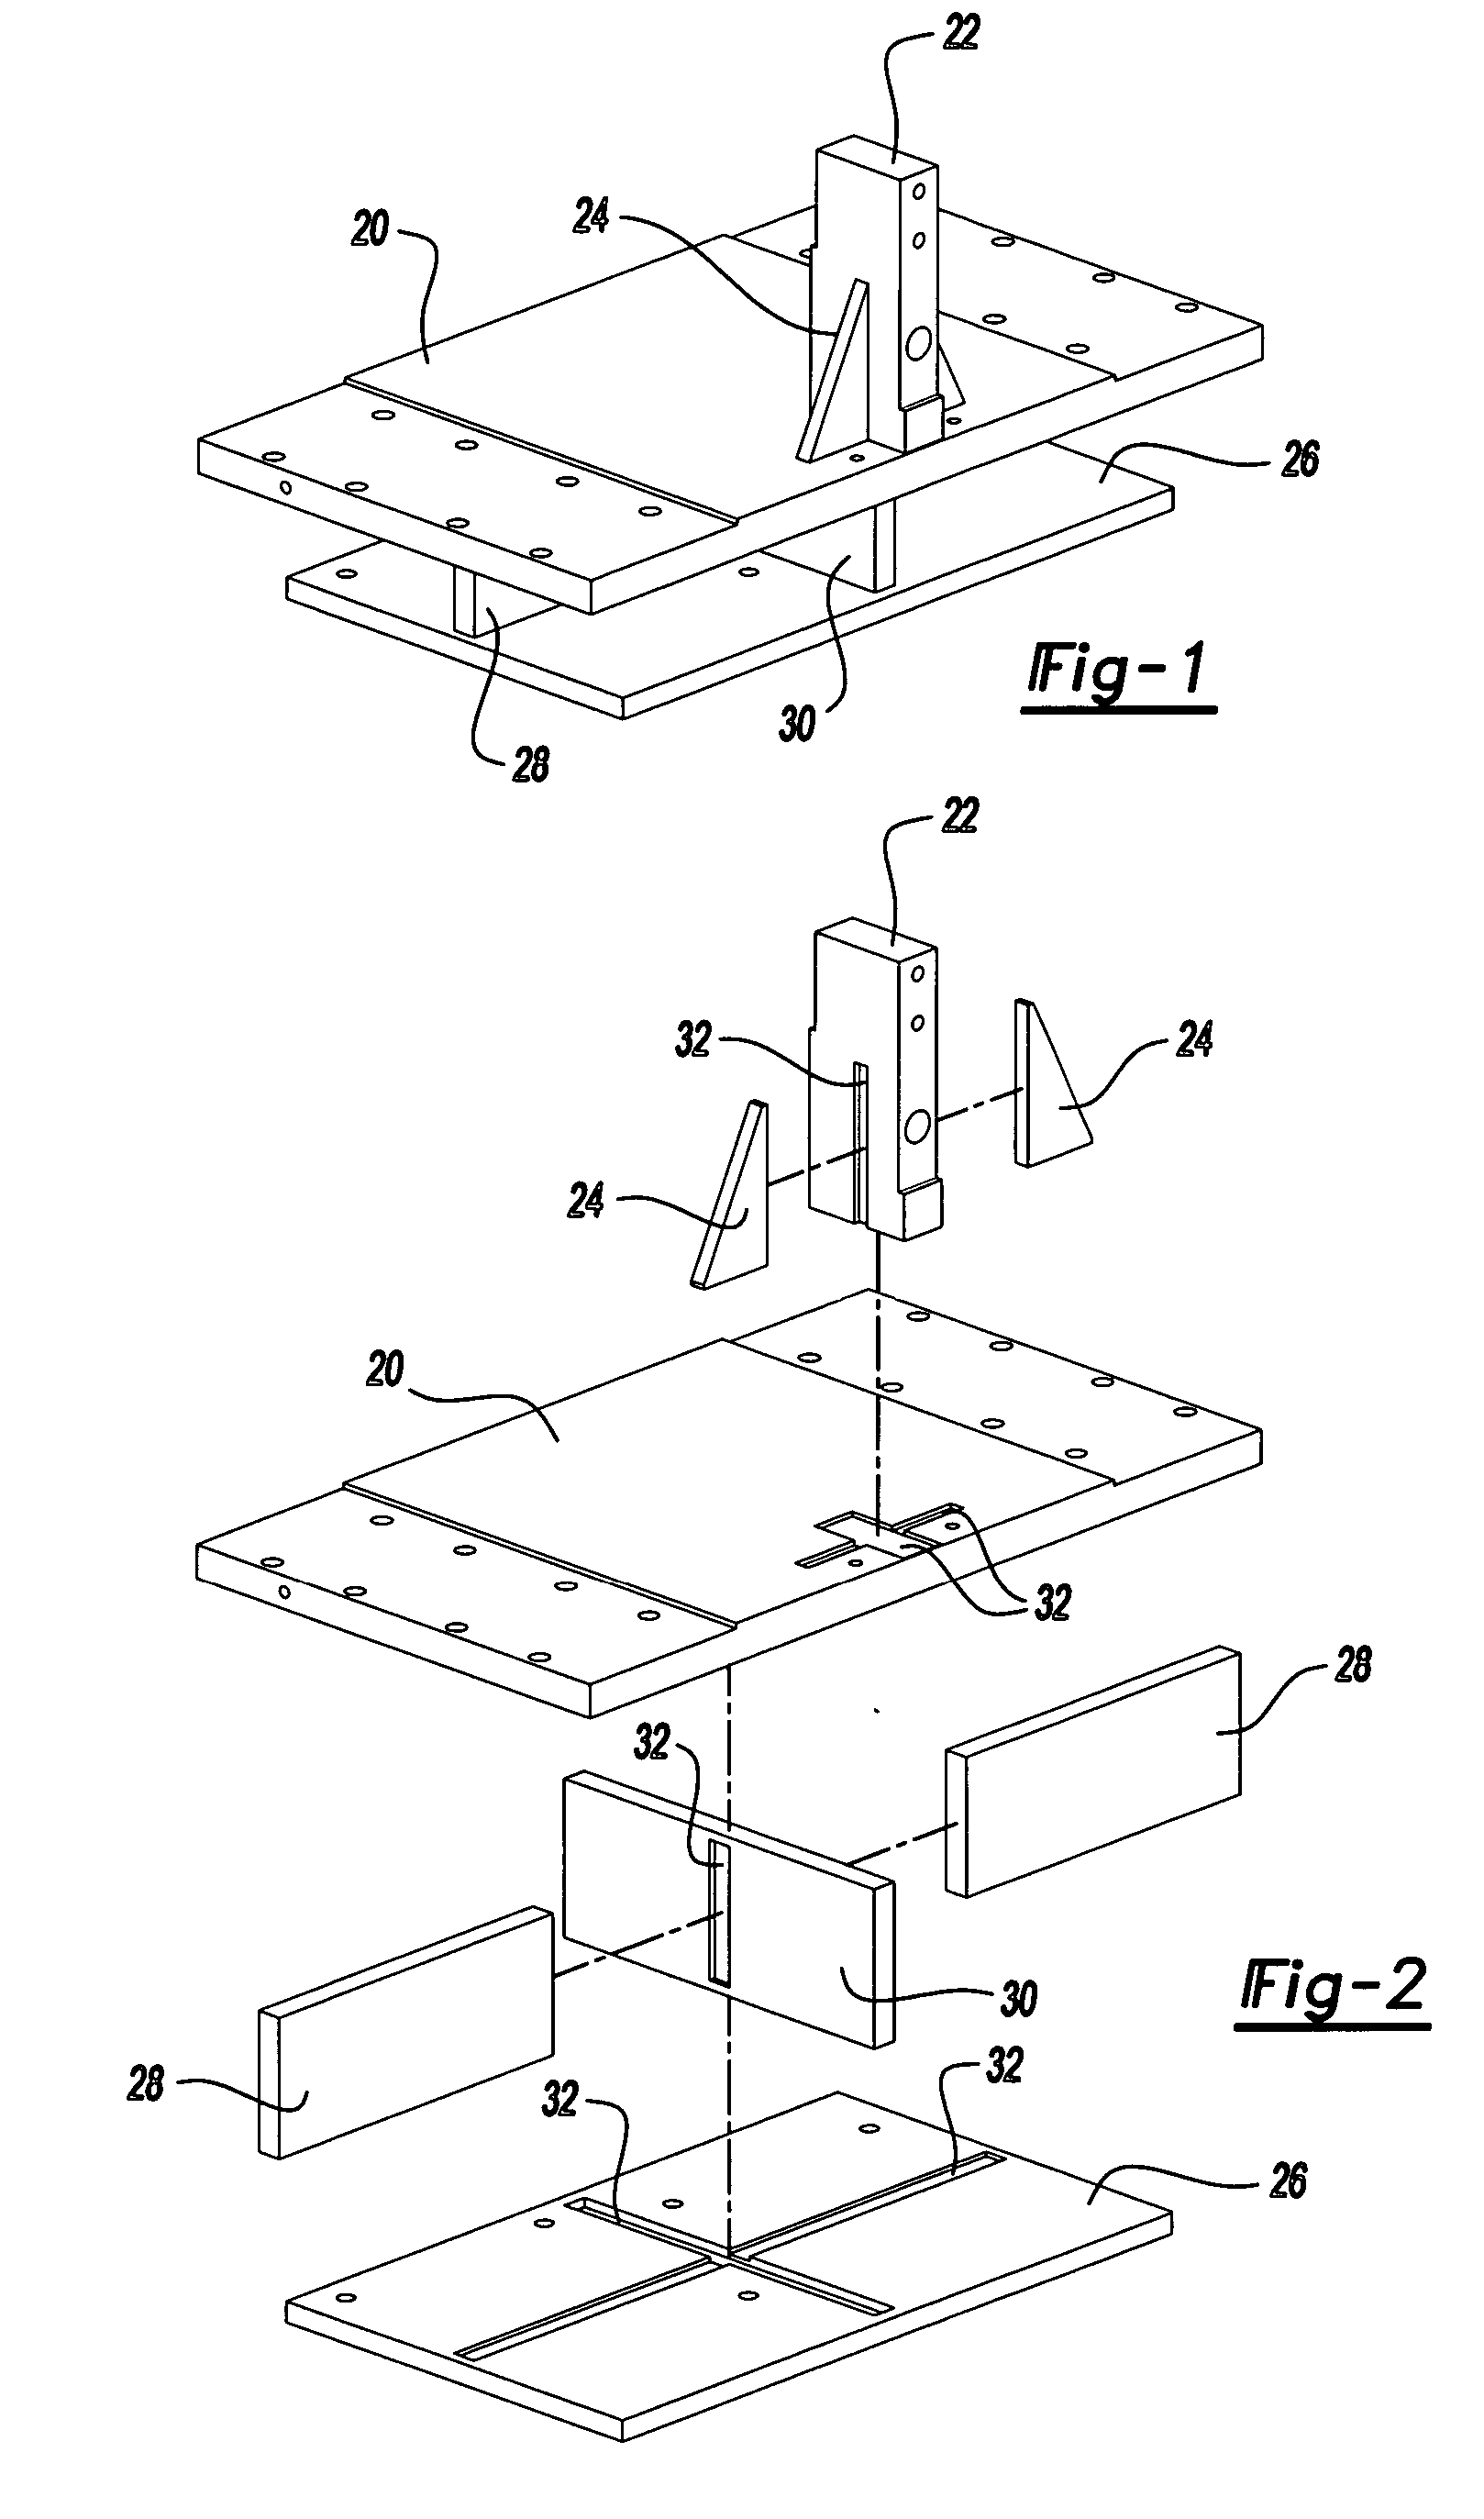 Computer programed method of forming and fabricating parts into an assembly